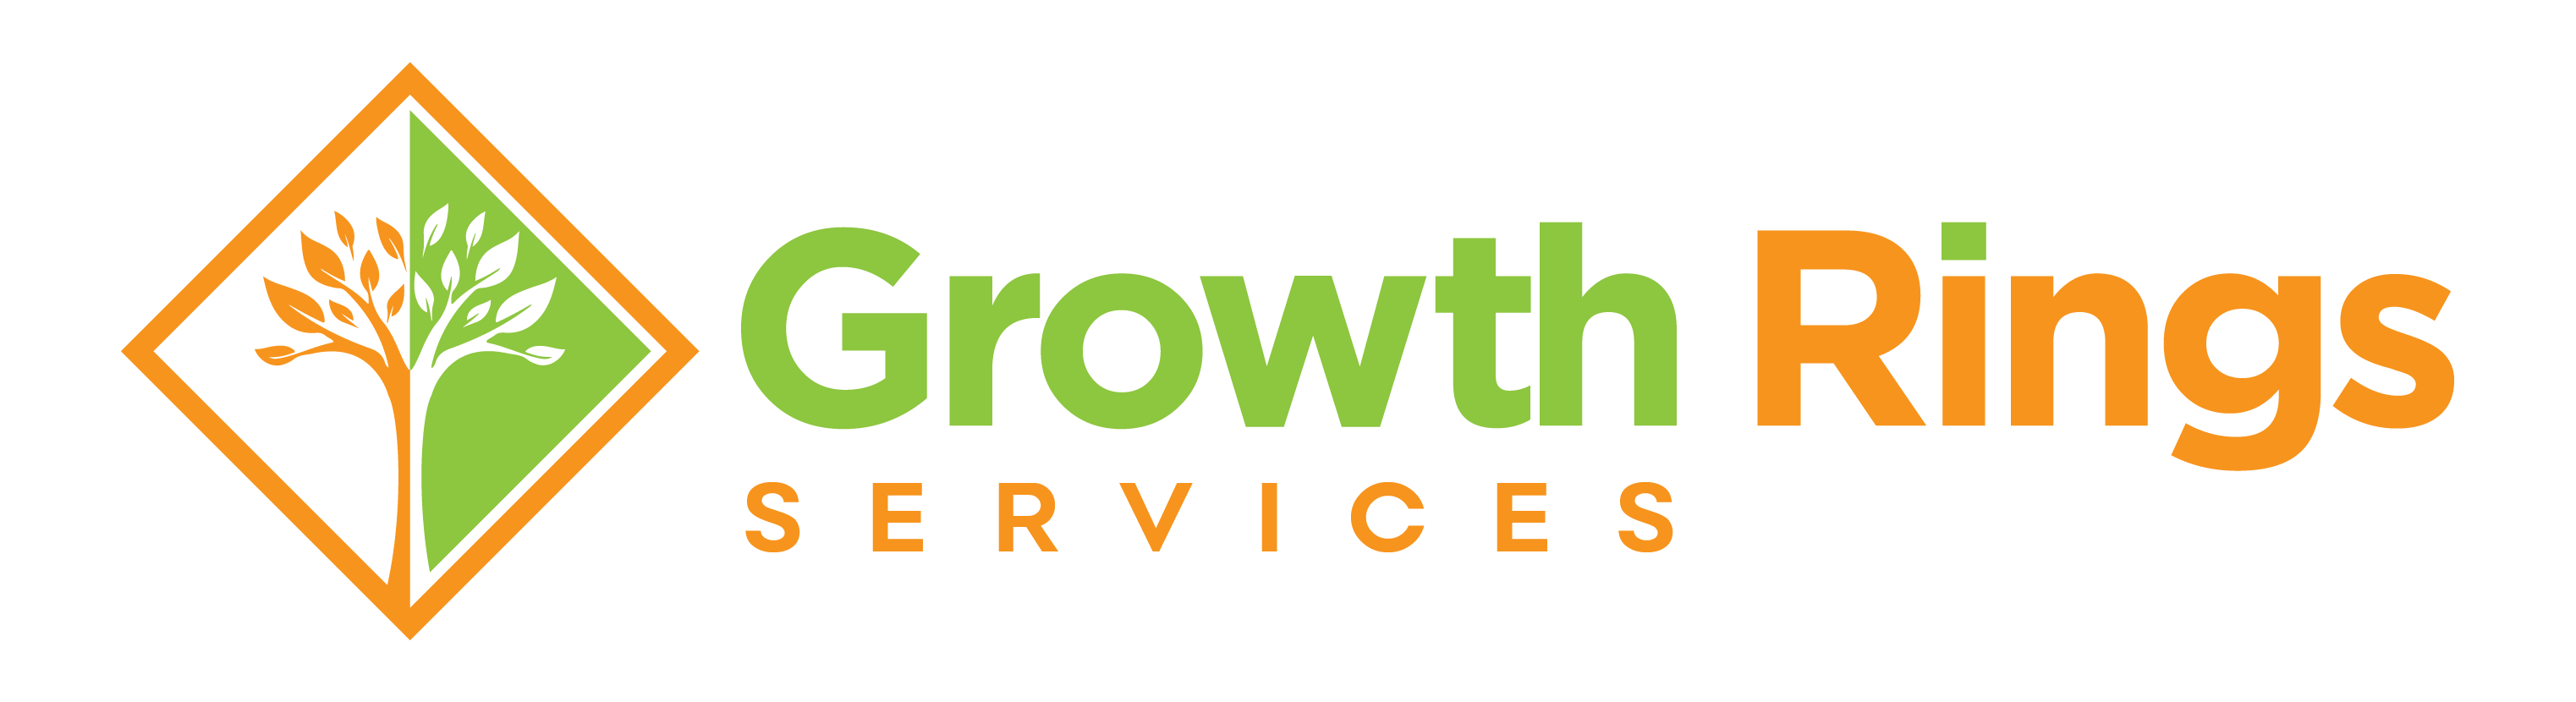 Growth Rings Services